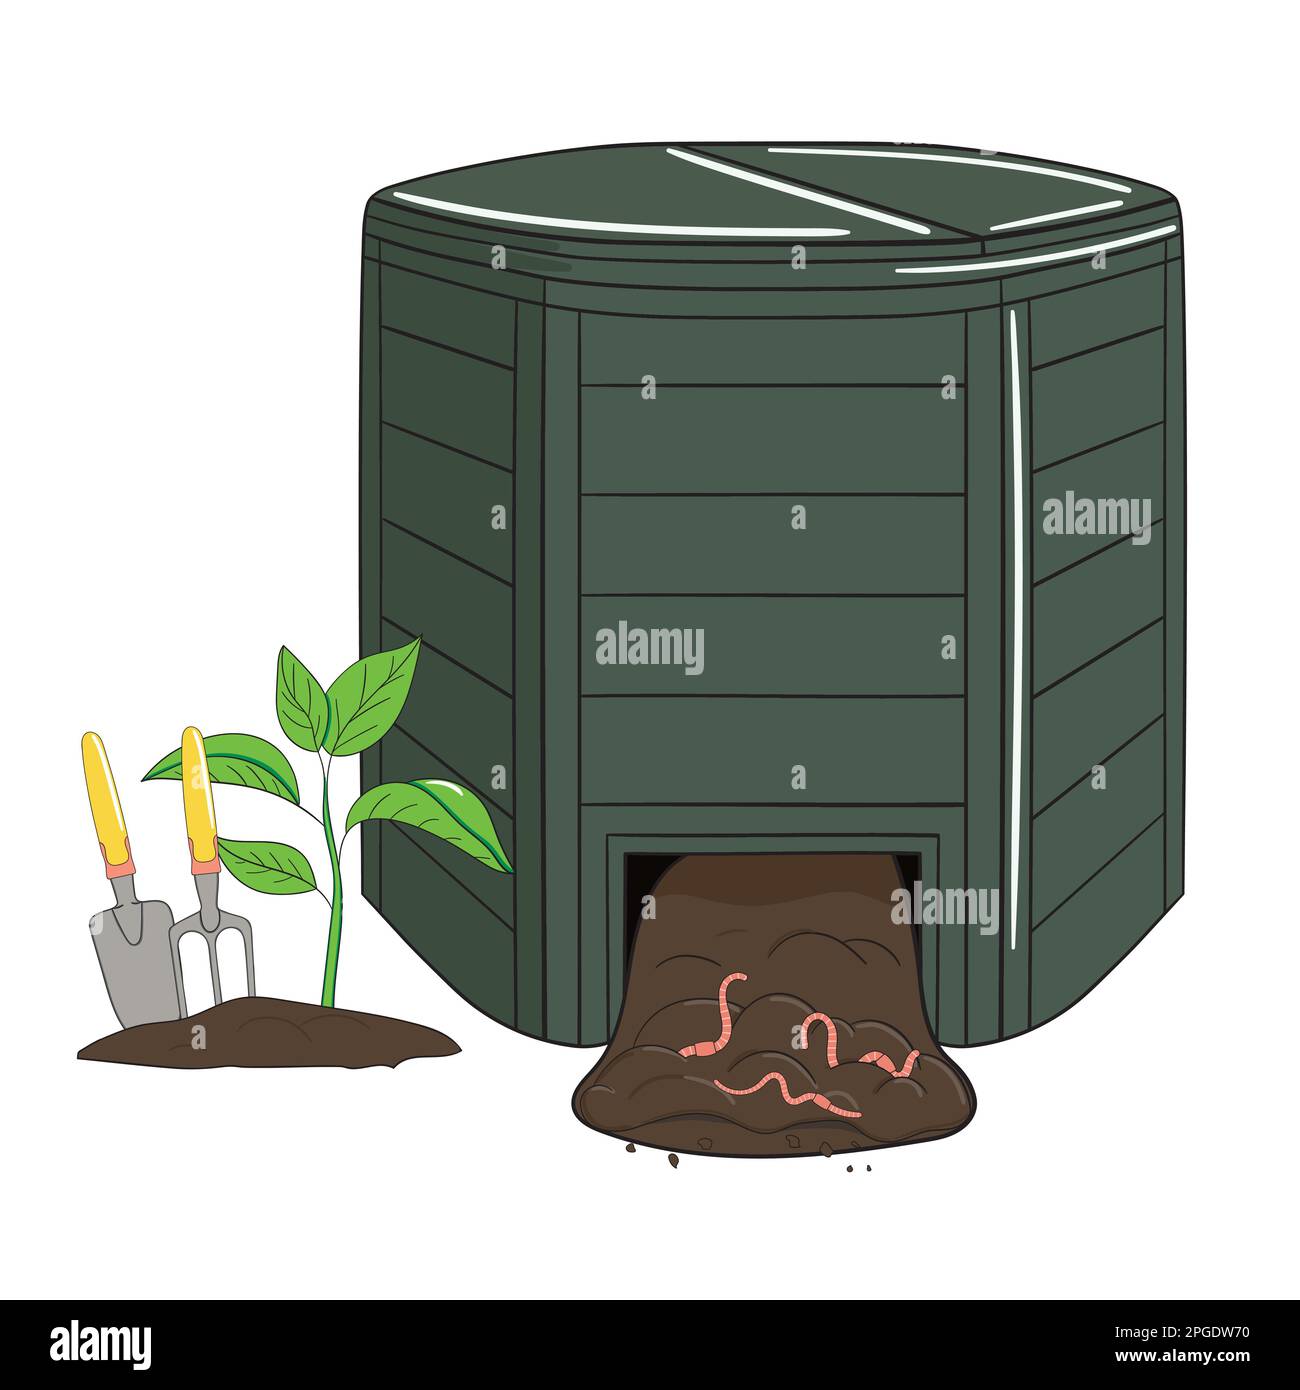 Garden plastic composting bin. Garden fertilizer organic with worms. Recycling organic waste. Sustainable living concept. Hand drawn vector illustrati Stock Vector